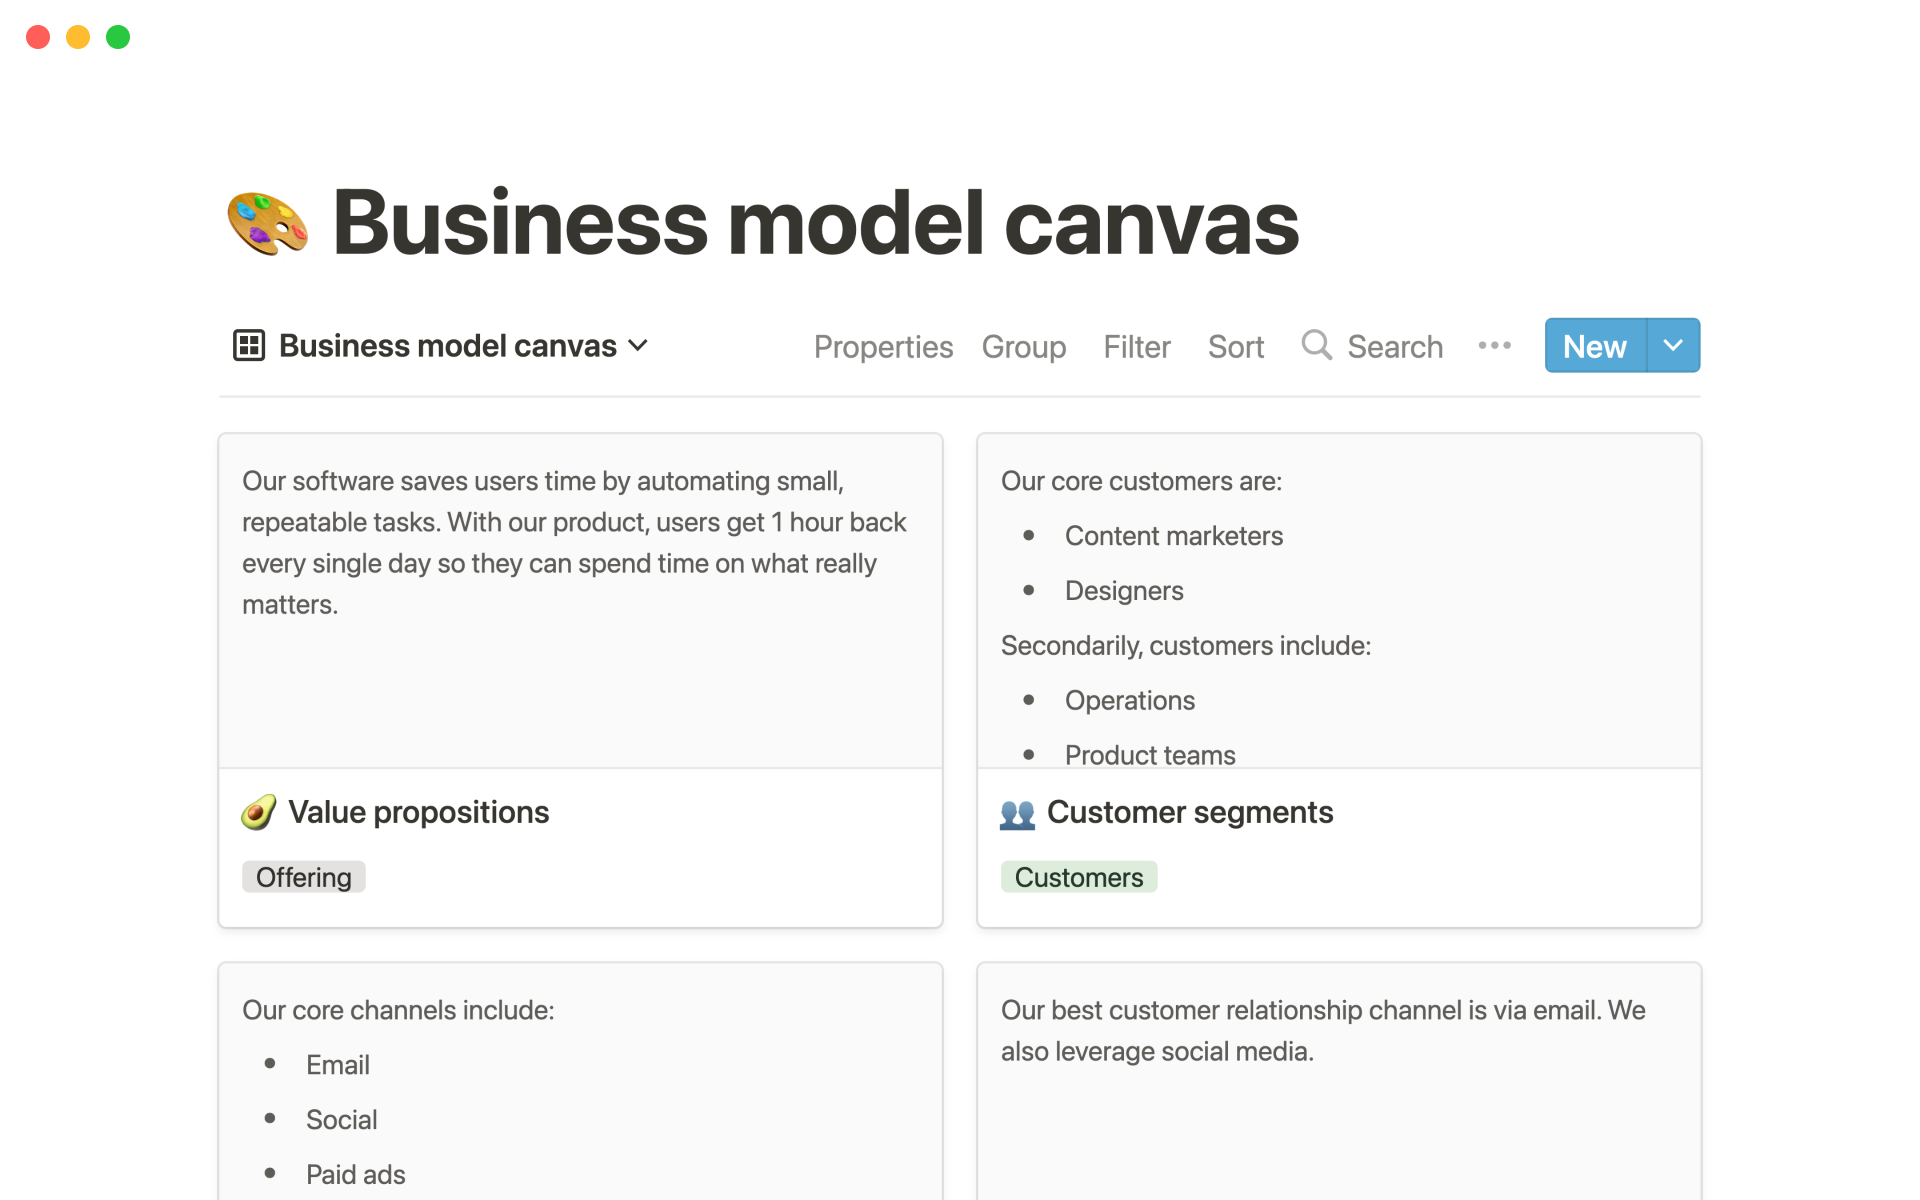 Business model canvas template